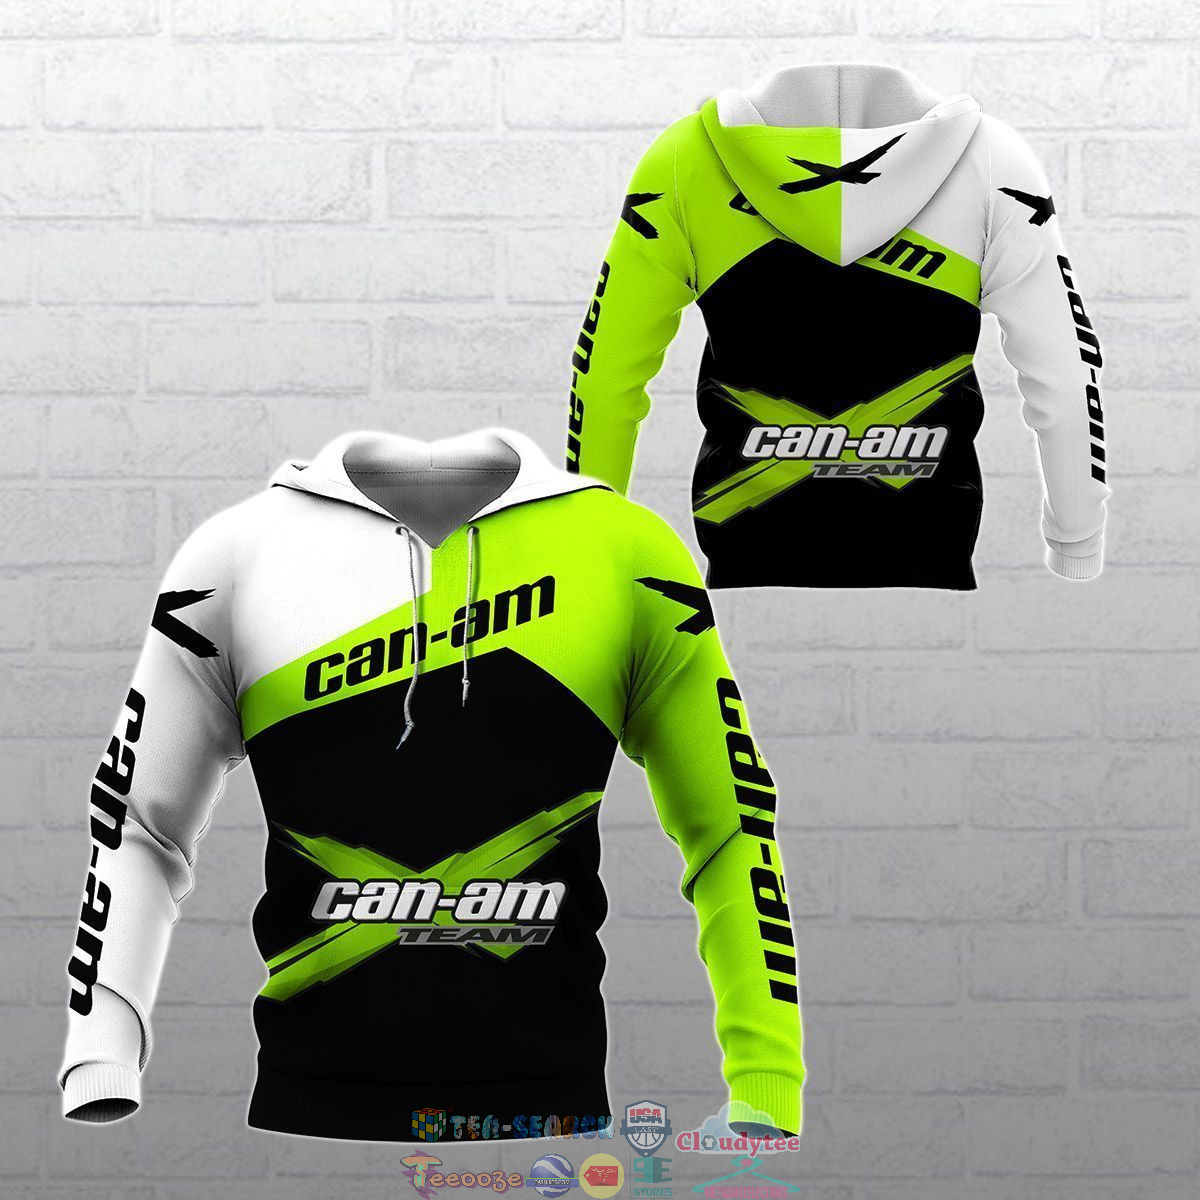 Can-Am Team ver 3 3D hoodie and t-shirt